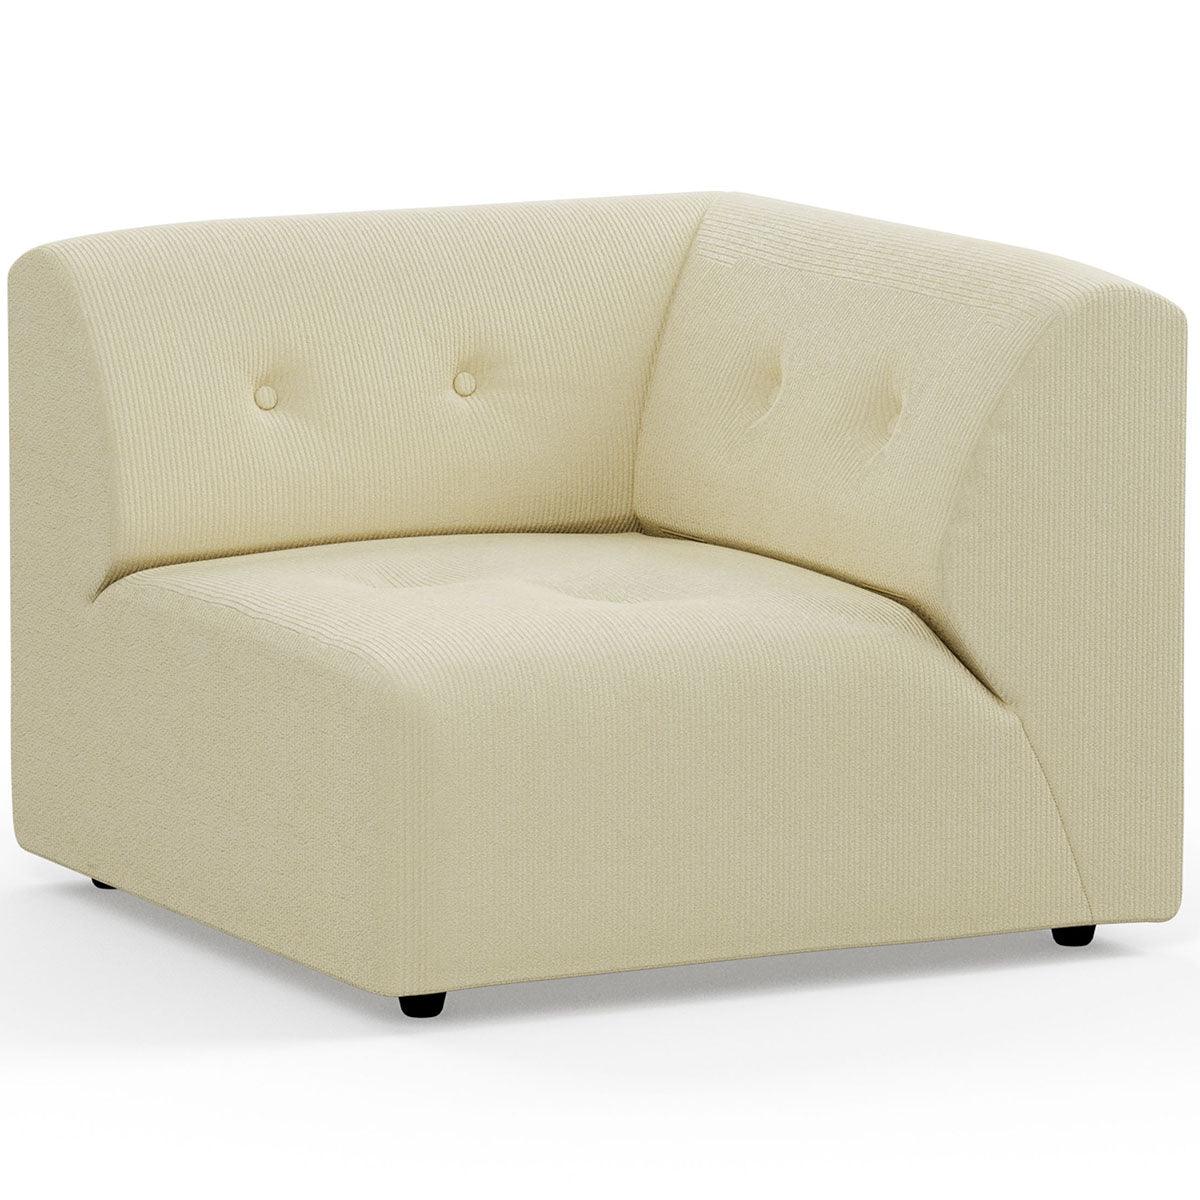 Vint Corduroy Rib Couch - Element Right - WOO .Design